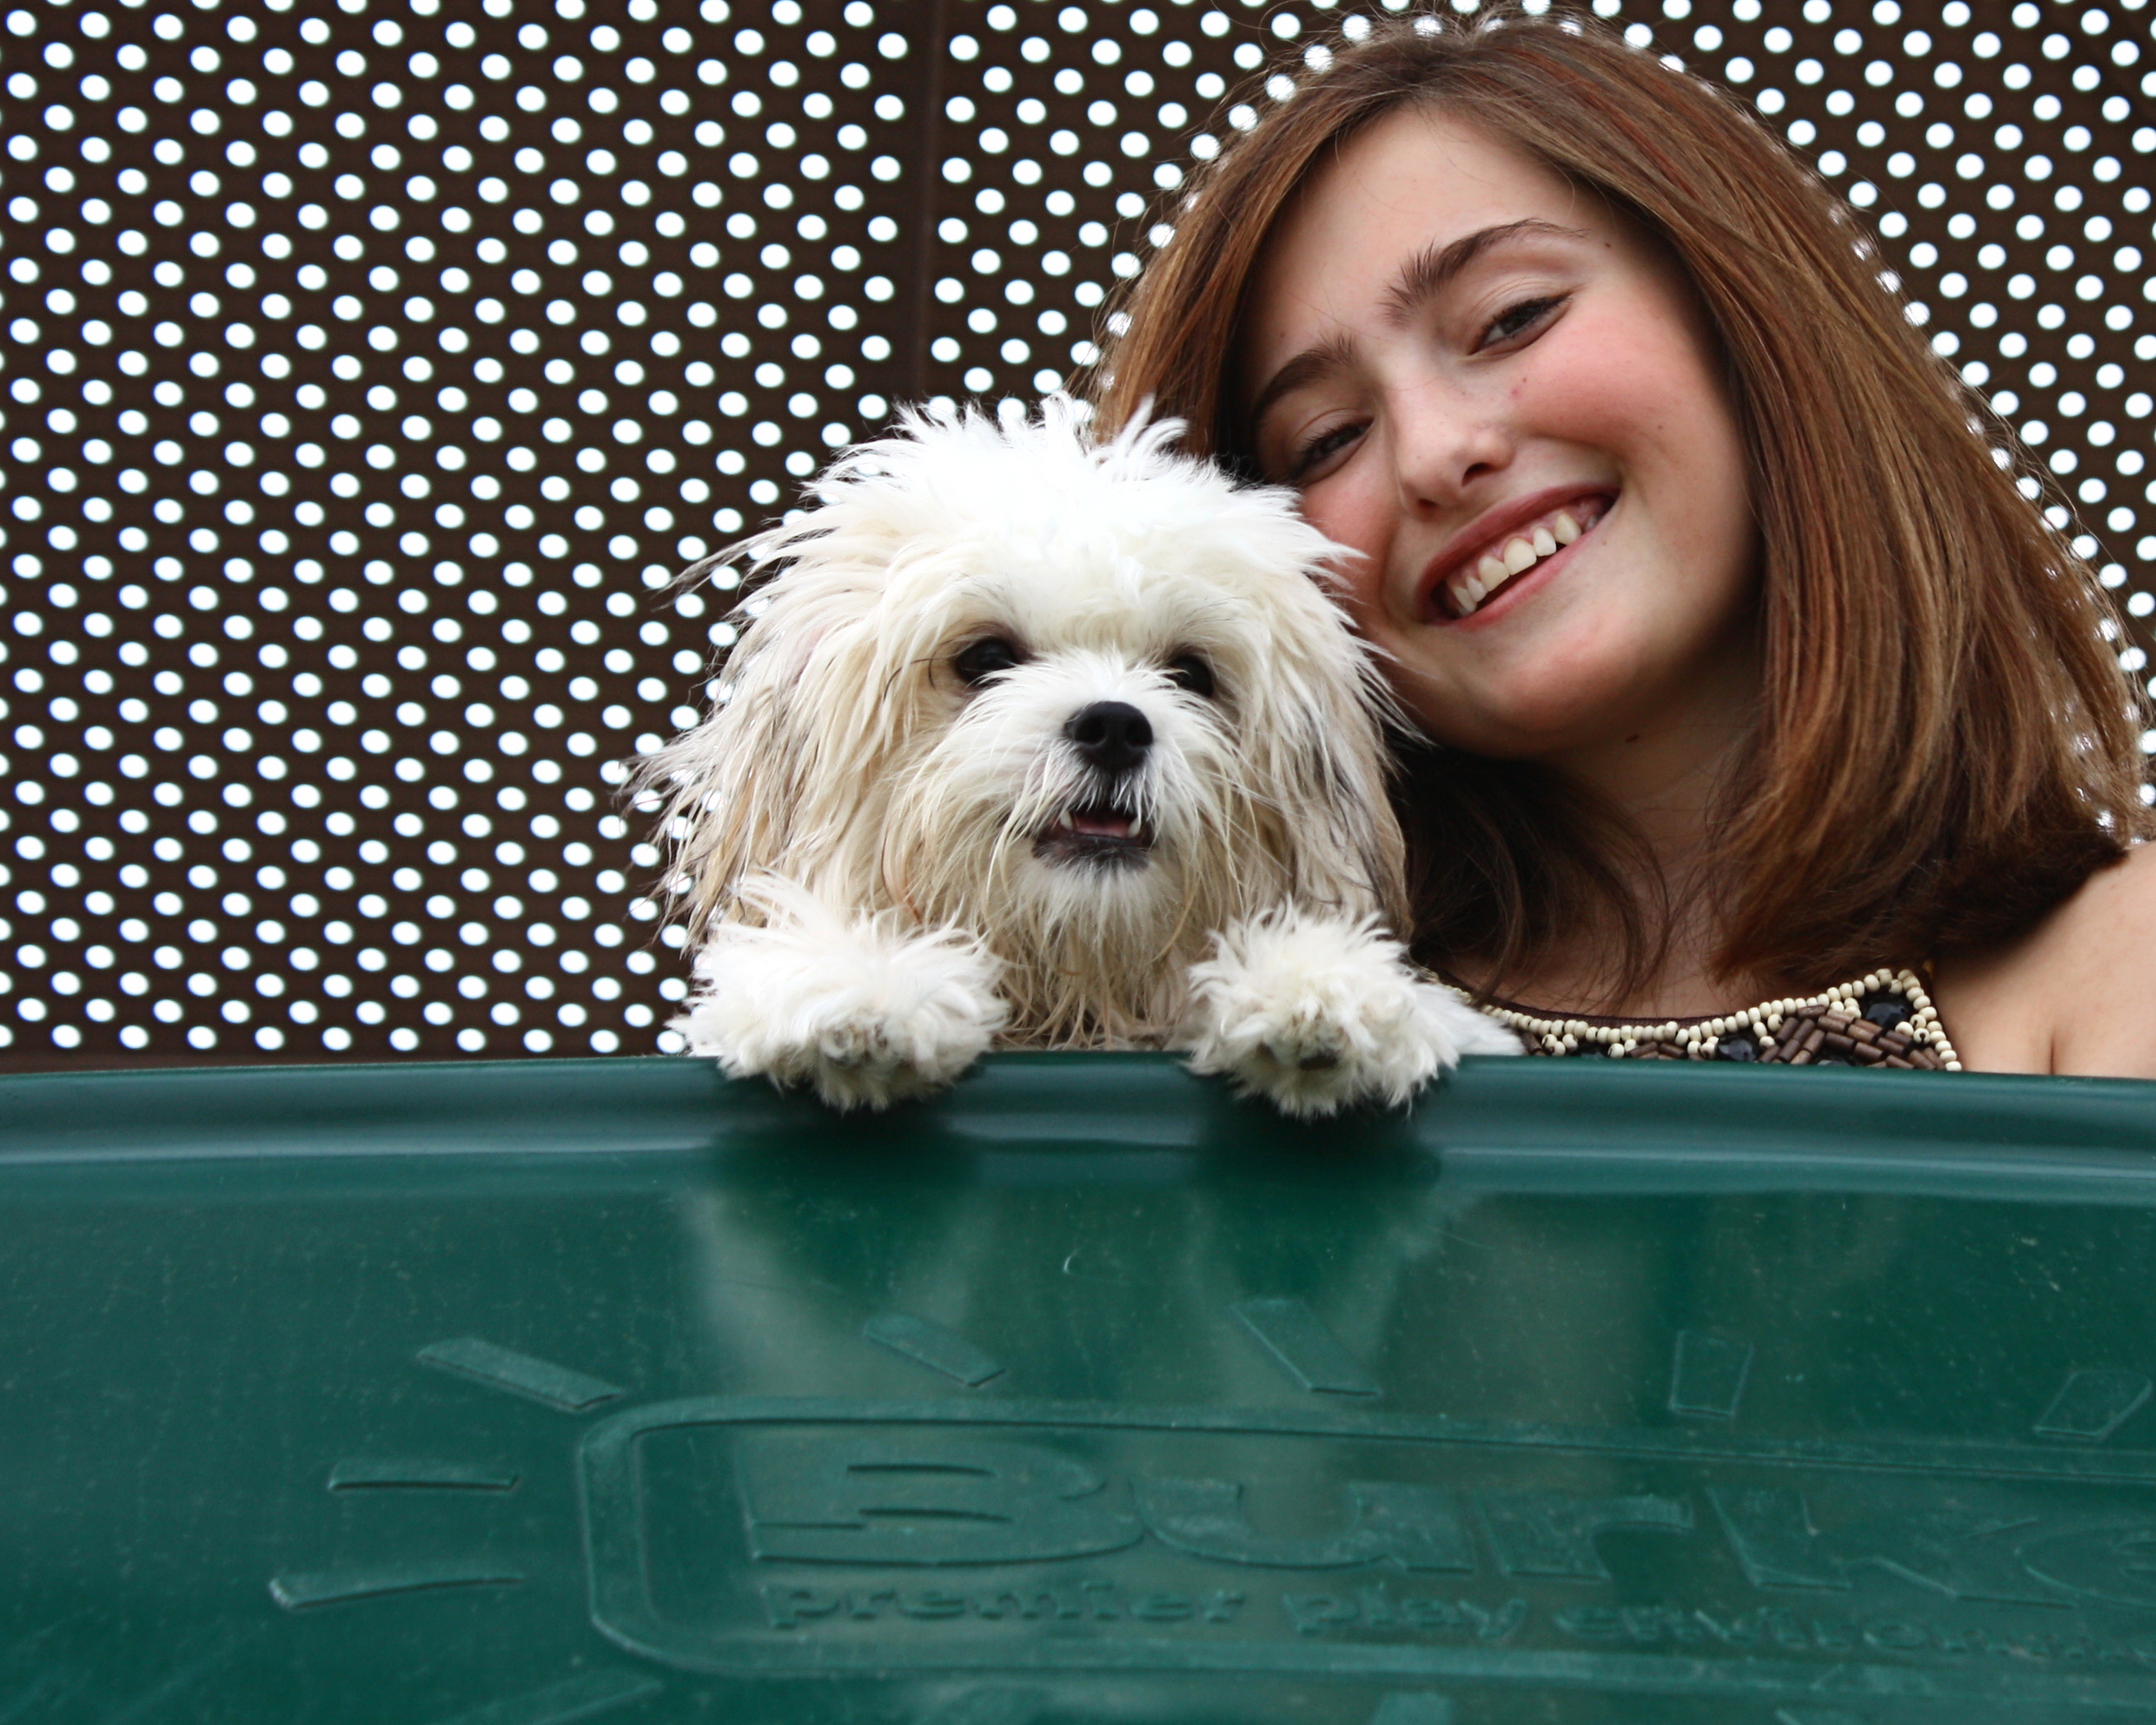 A beautiful young girl playing with dog, Animals, Pets, Tweens, Teens, HQ Photo